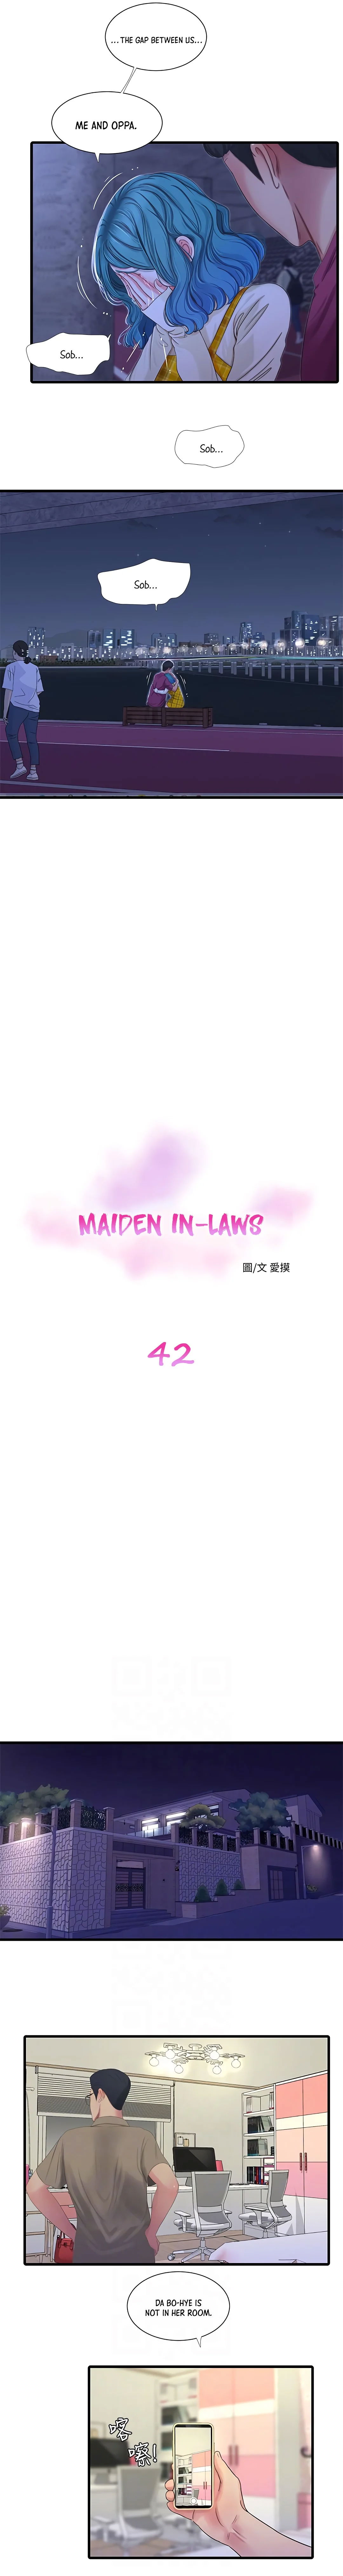 maidens-in-law-chap-42-2